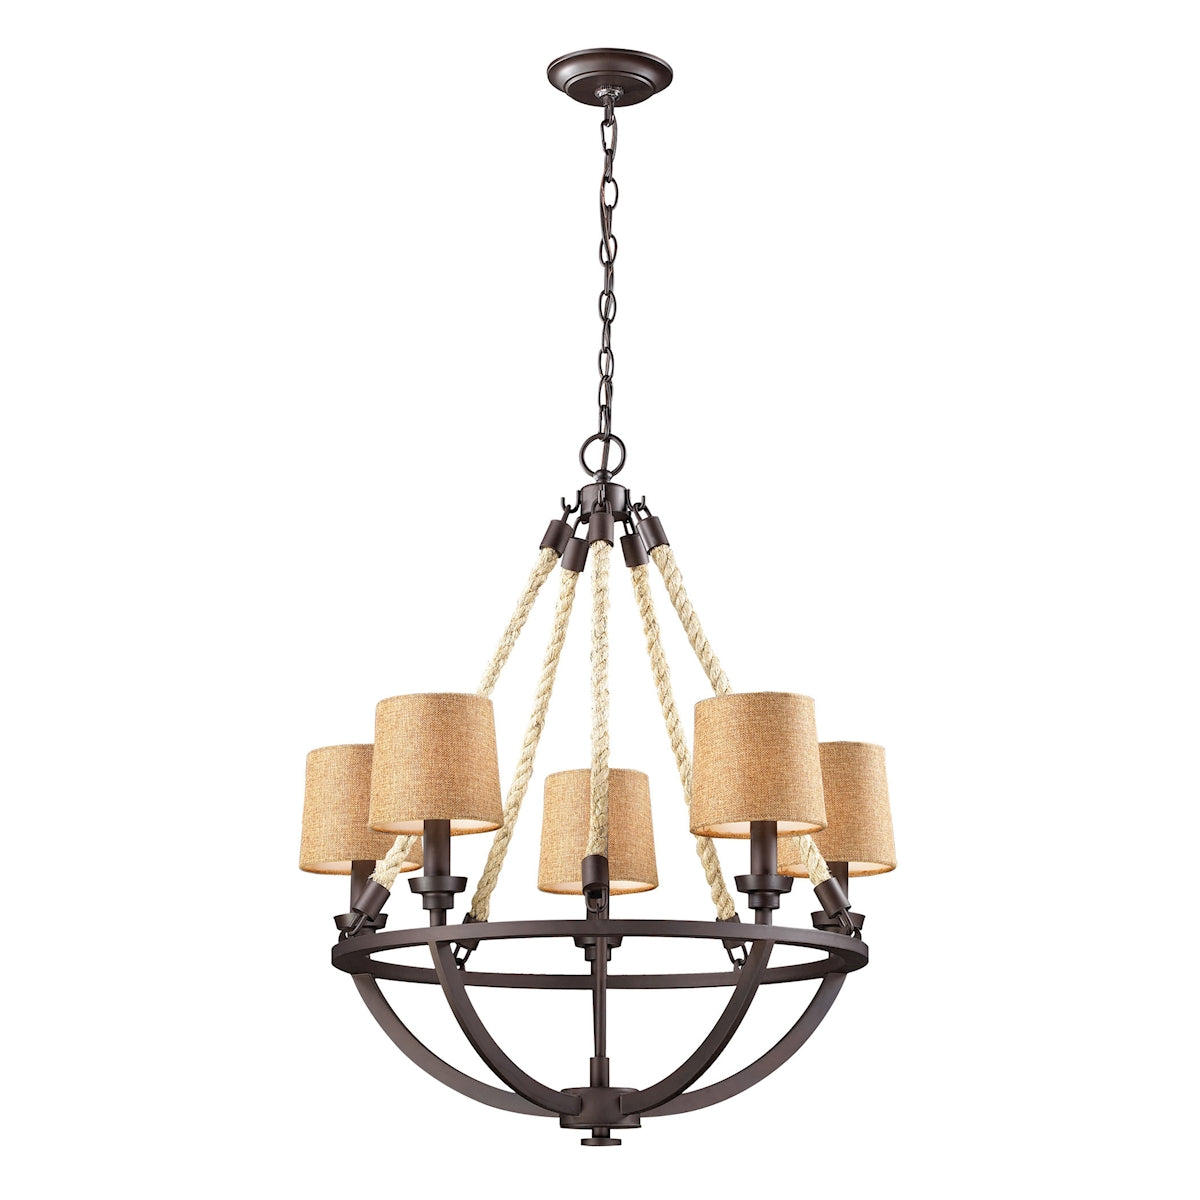 ELK Lighting 63015-5 Natural Rope 5-Light Chandelier in Aged Bronze with Tan Linen Shades